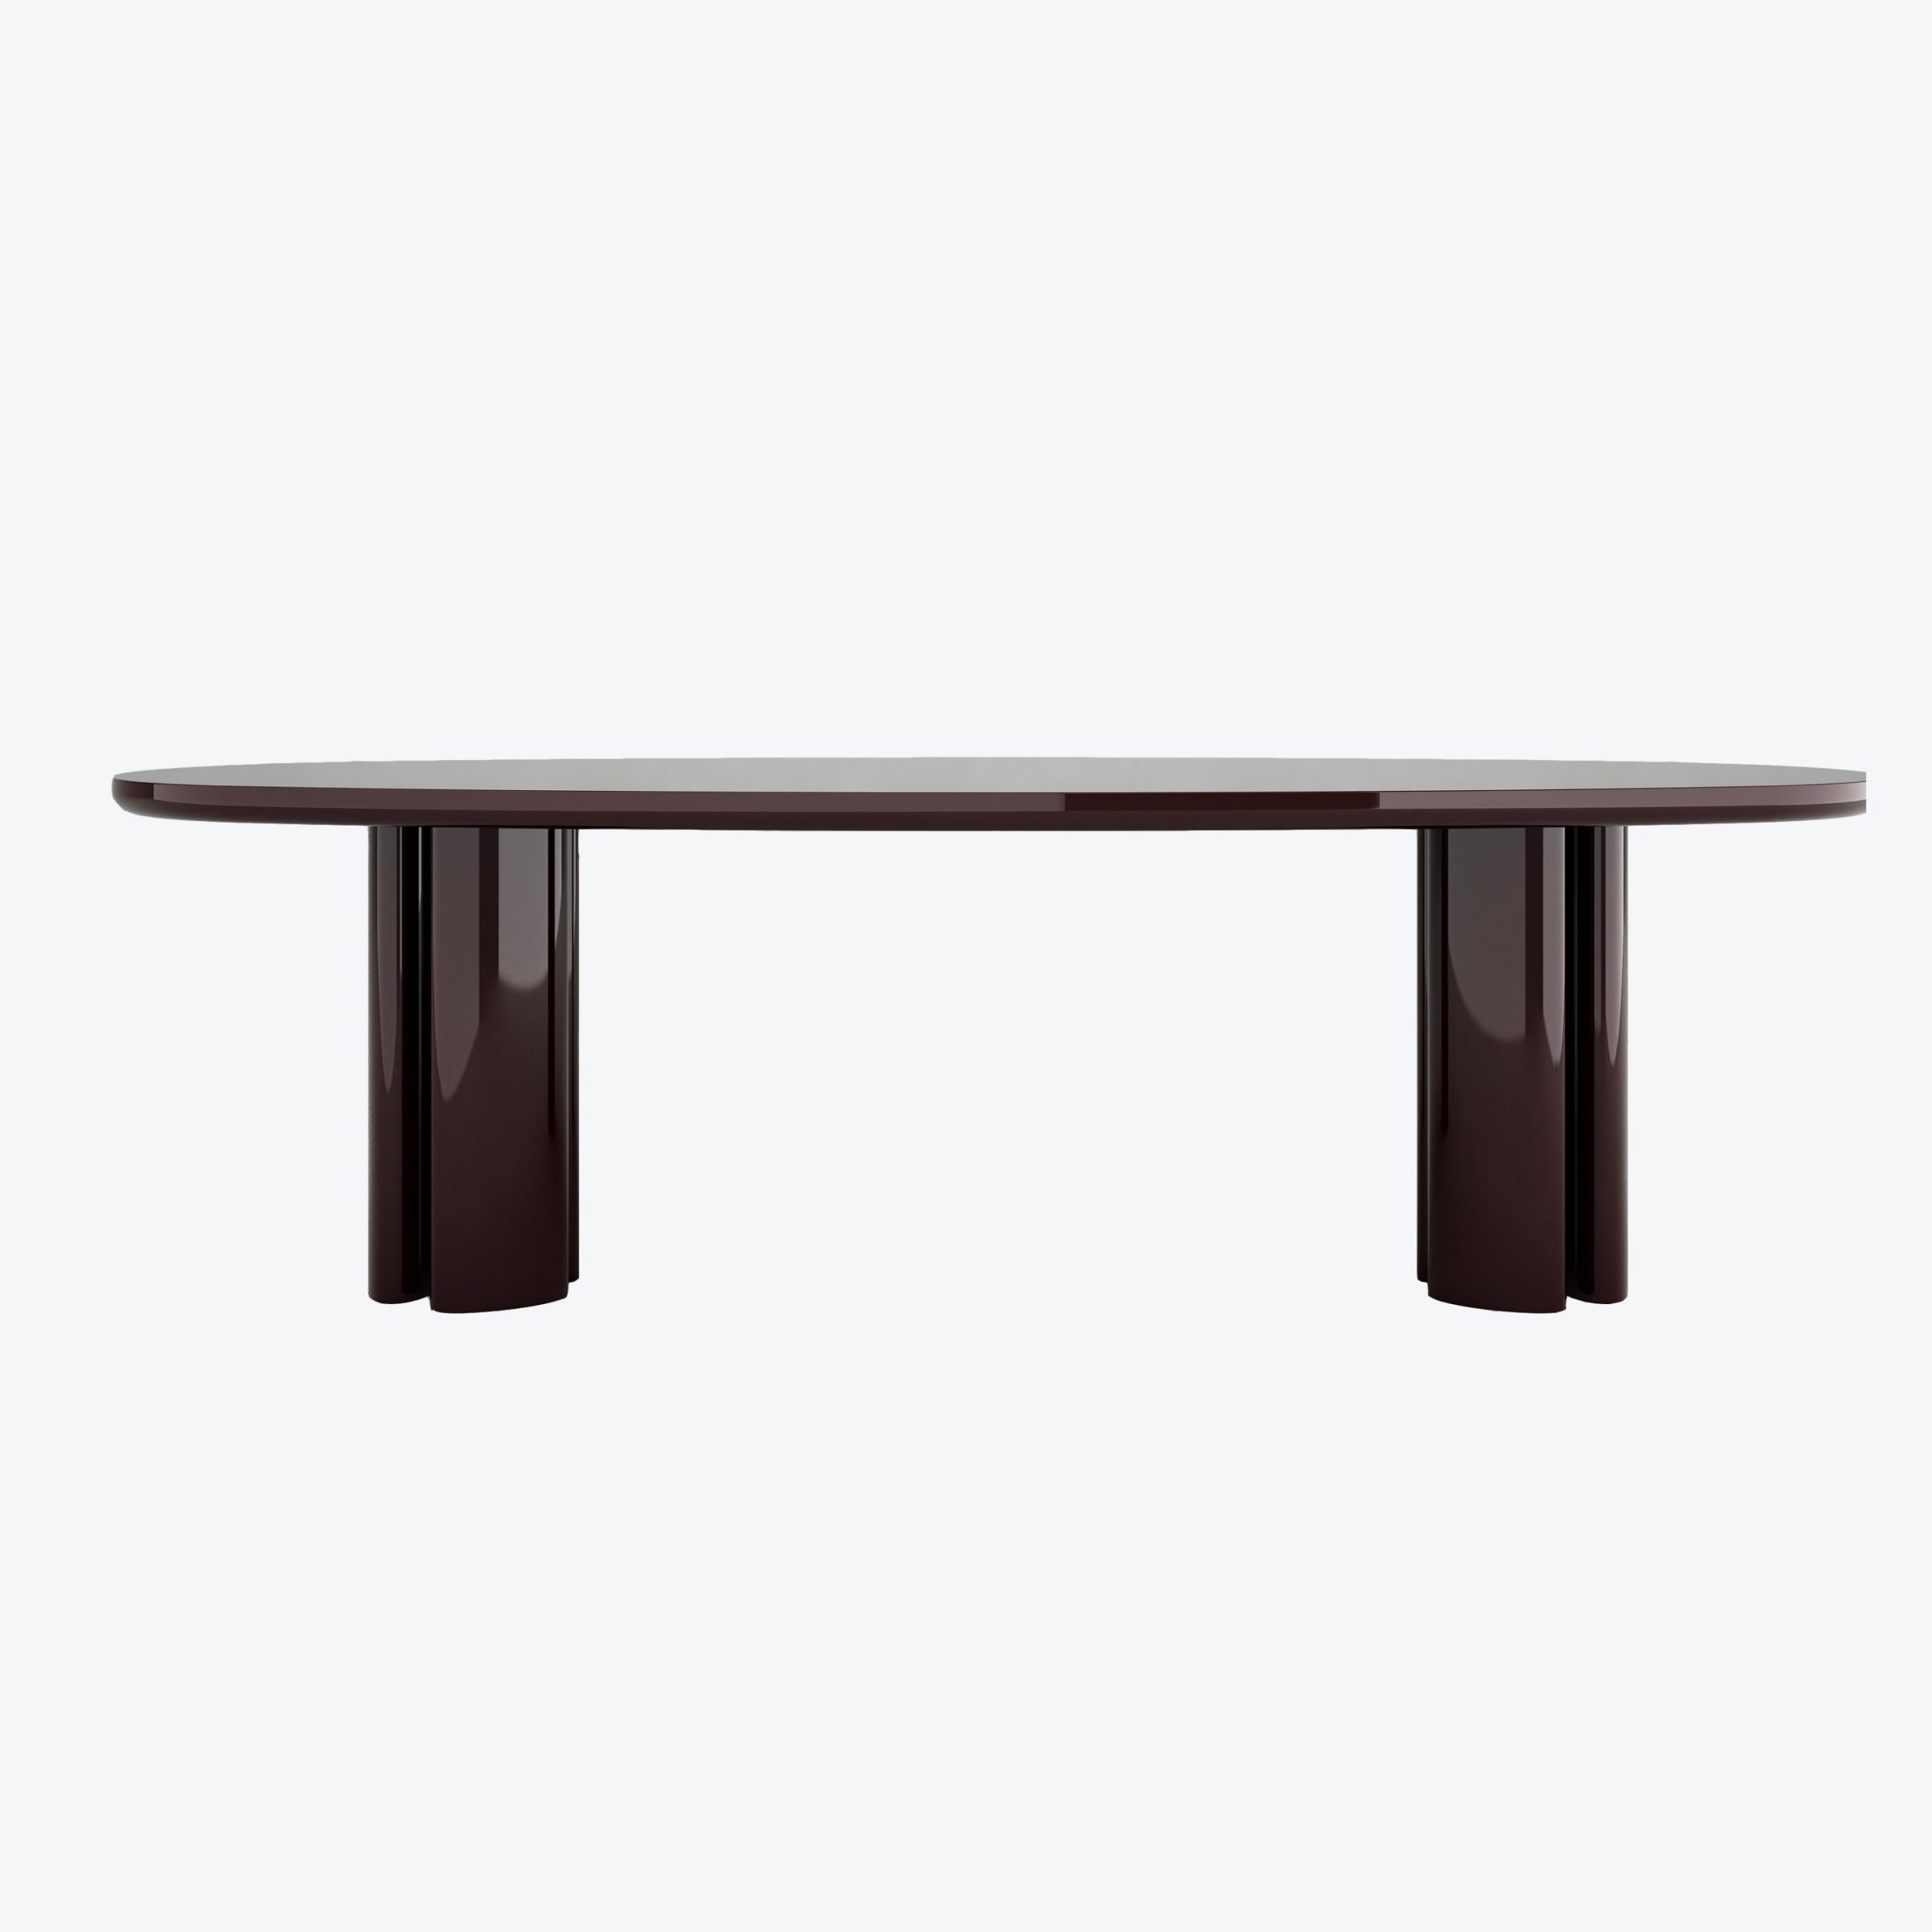 Dining Lacquer Burgundy Balzano Invisible Francesco Table Collection The Swan